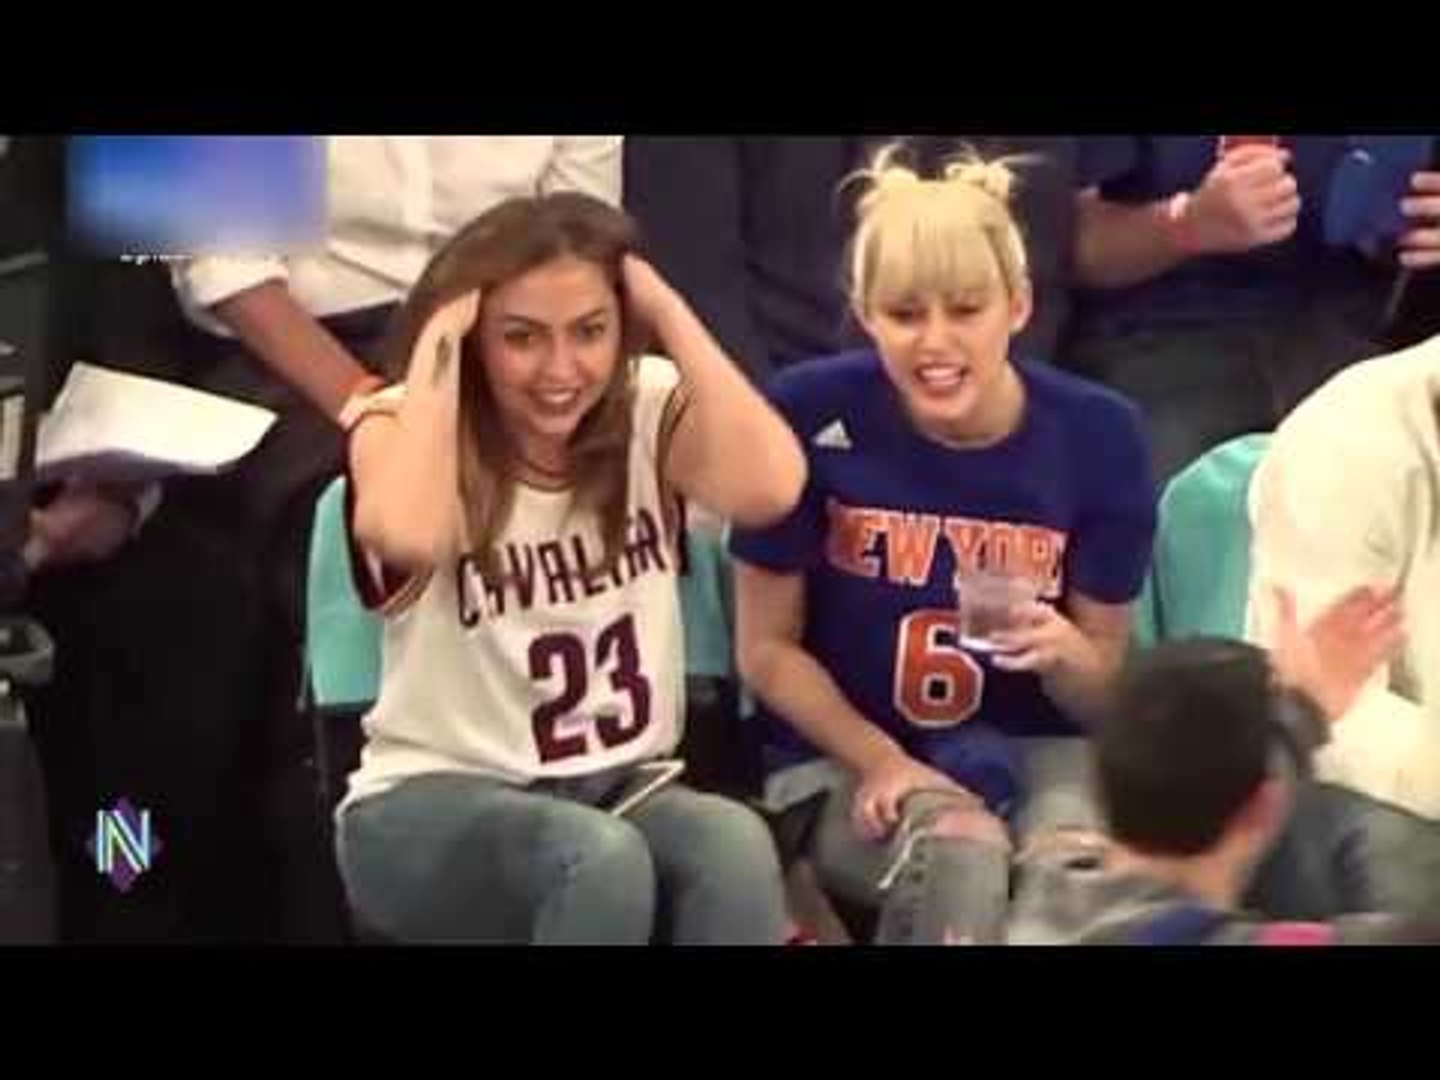 Miley Cyrus jokes with sister courtside at New York Knicks game